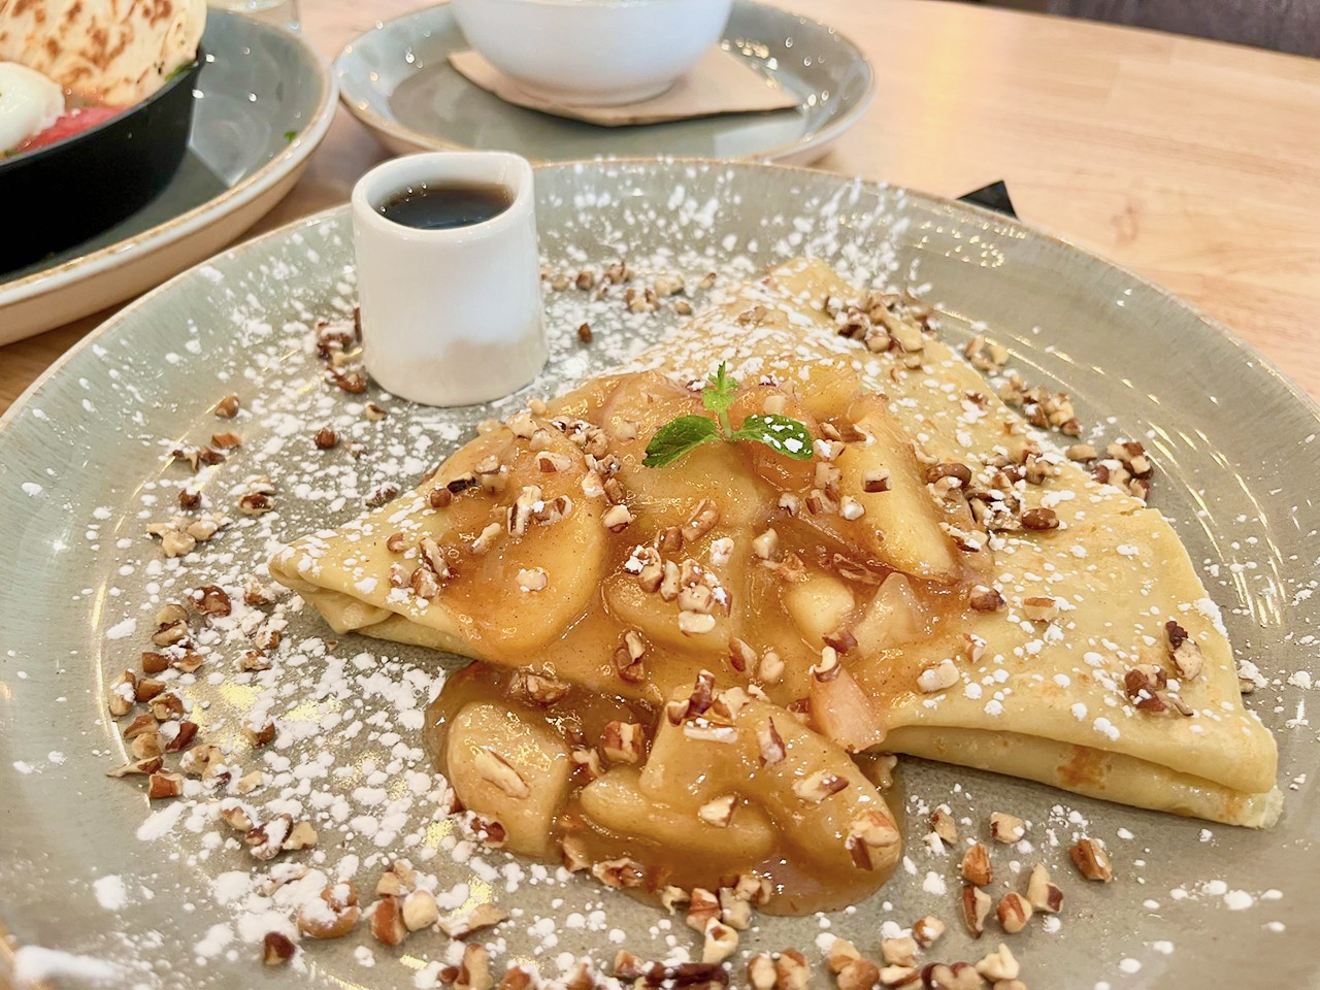 Apple crepes offer a sweet end (or start) to the meal.